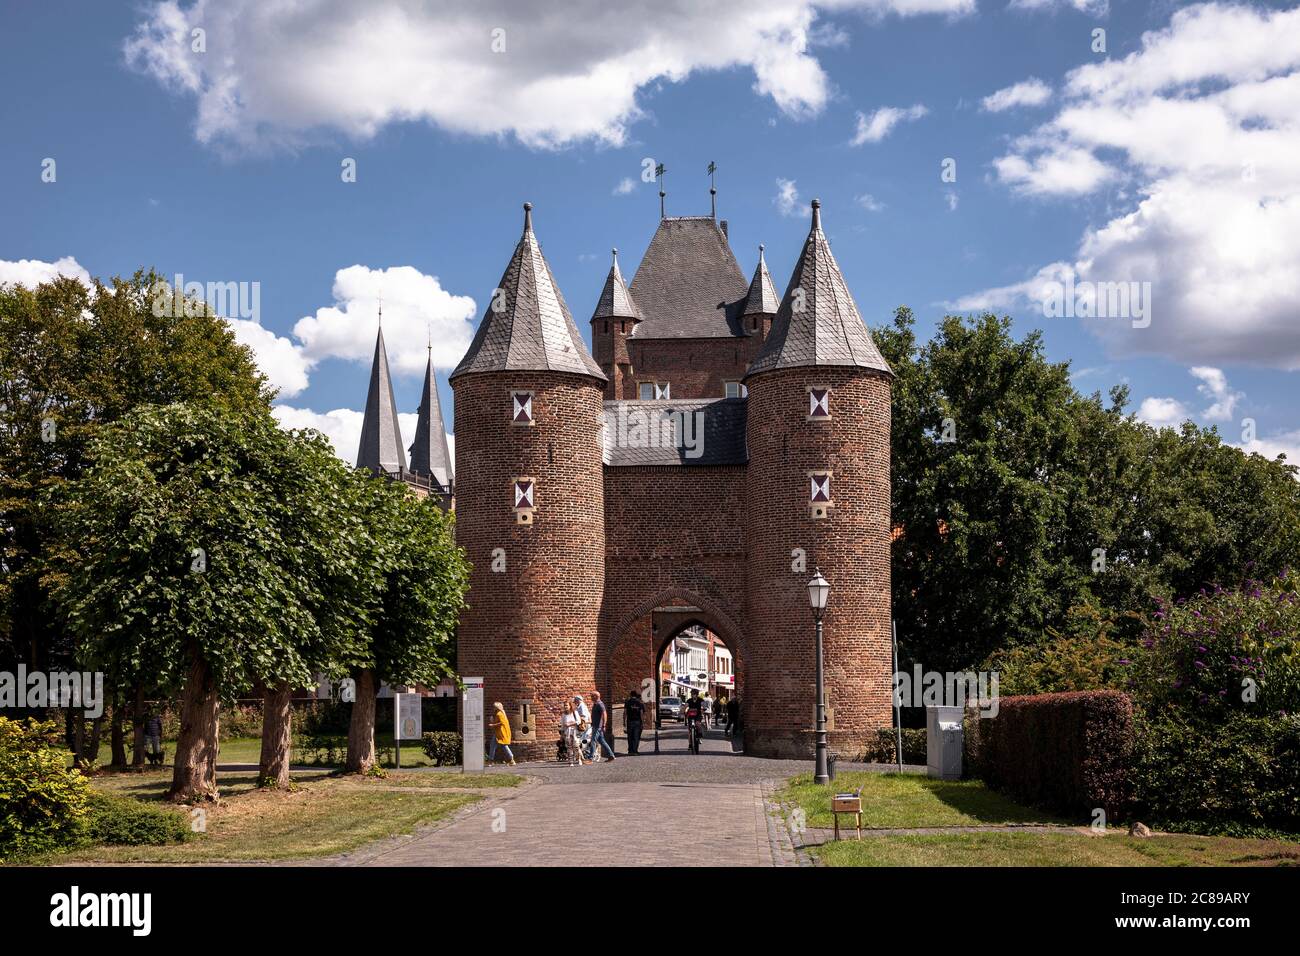 the old city gate, Klever Tor, built 1393, in the background the steeples of the cathedral, Xanten, North Rhine-Westphalia, Germany.  das 1393 erbaute Stock Photo